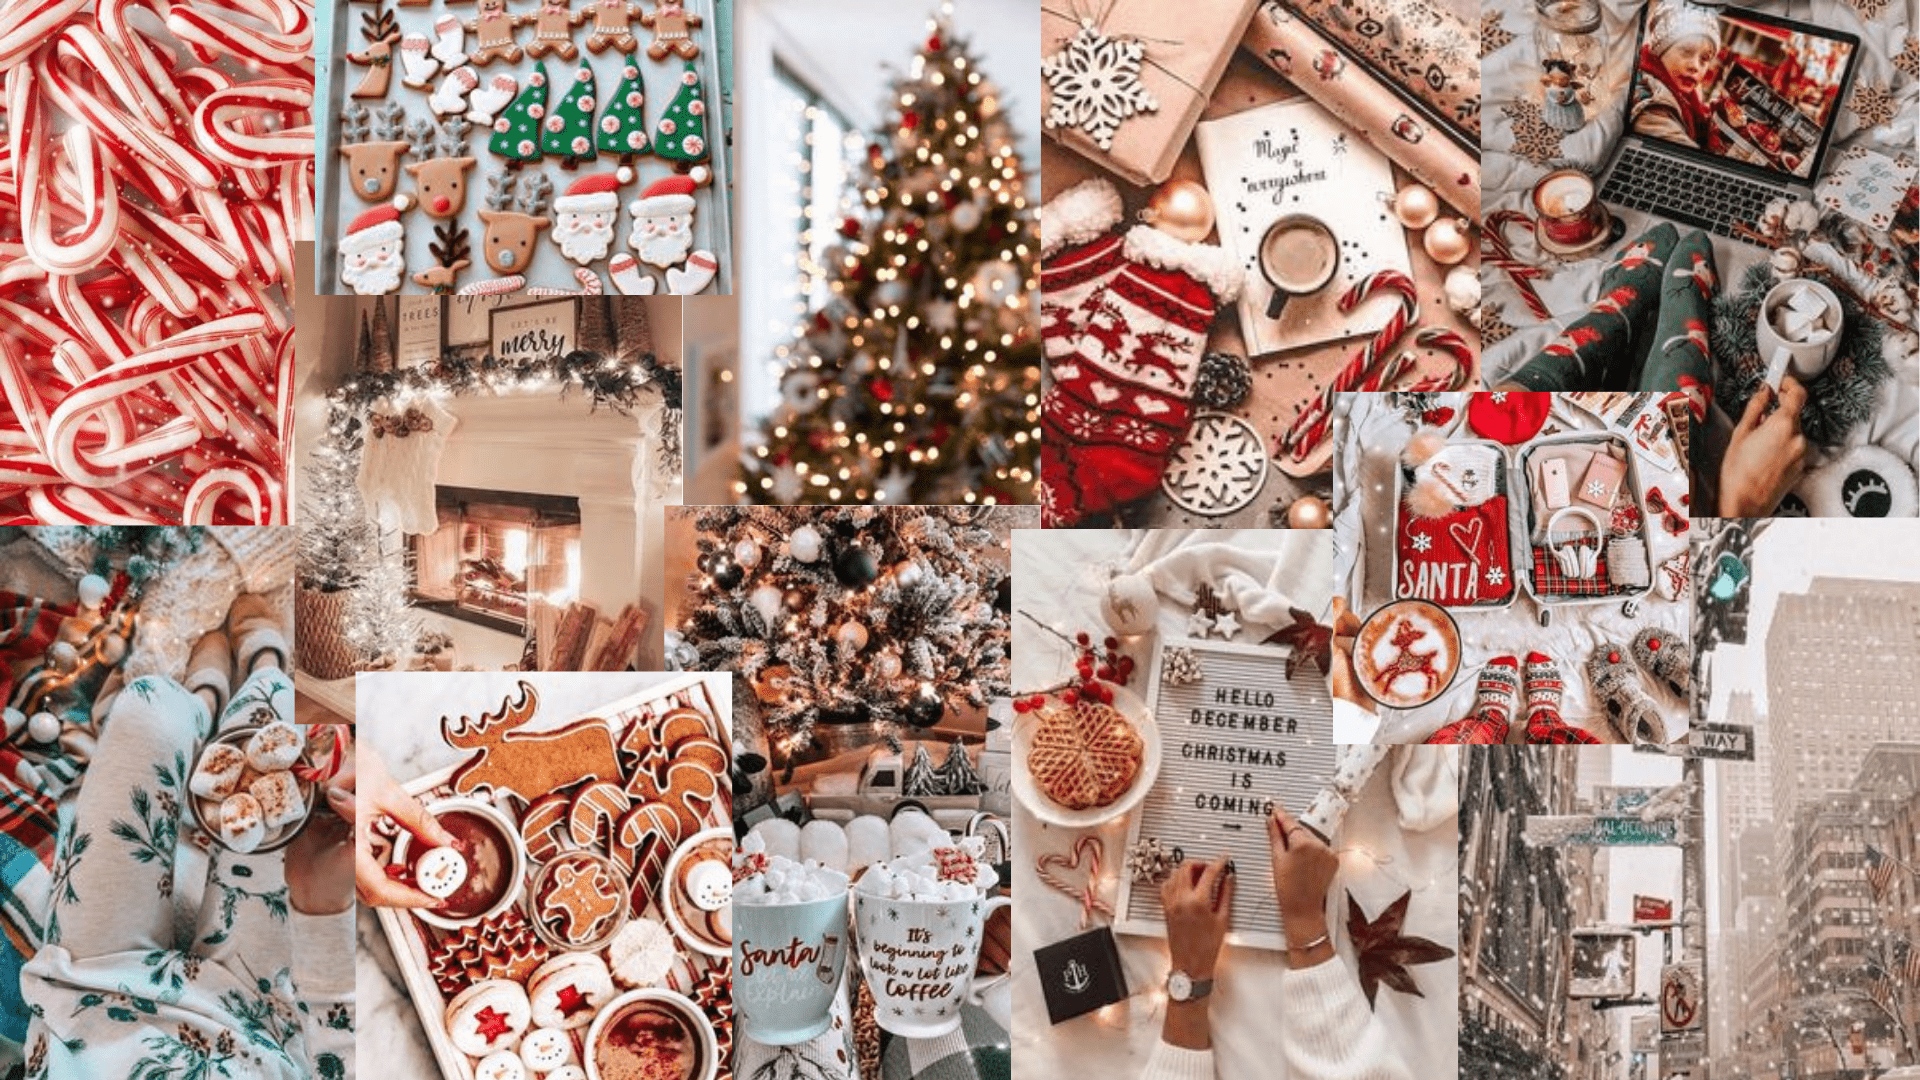 A collage of Christmas themed images including a Christmas tree, gingerbread cookies, and a cup of hot chocolate. - Christmas